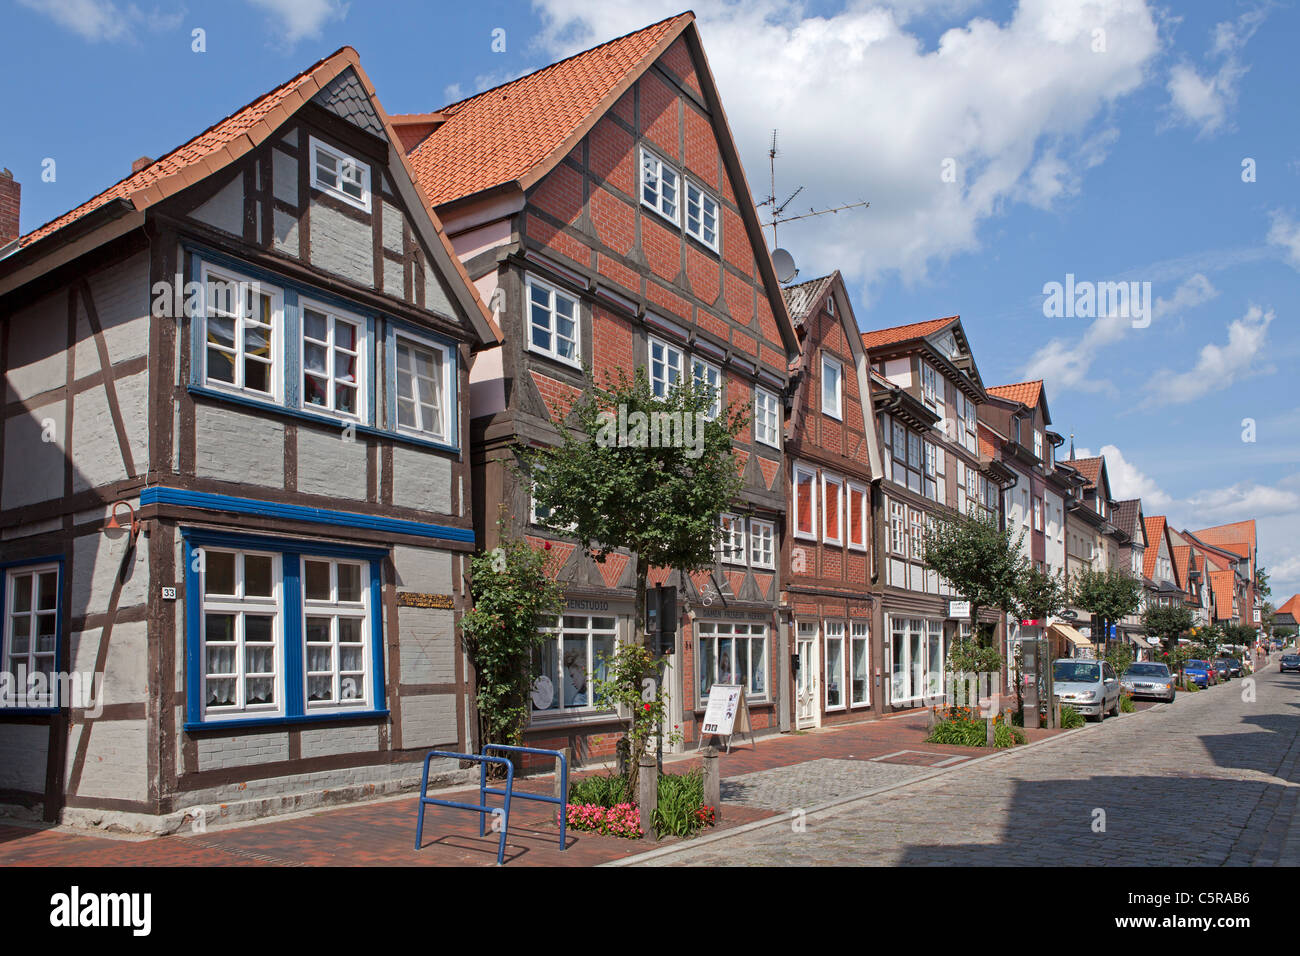 half-timbered houses in Lange Strasse, Dannenberg, Lower Saxony, Germany Stock Photo